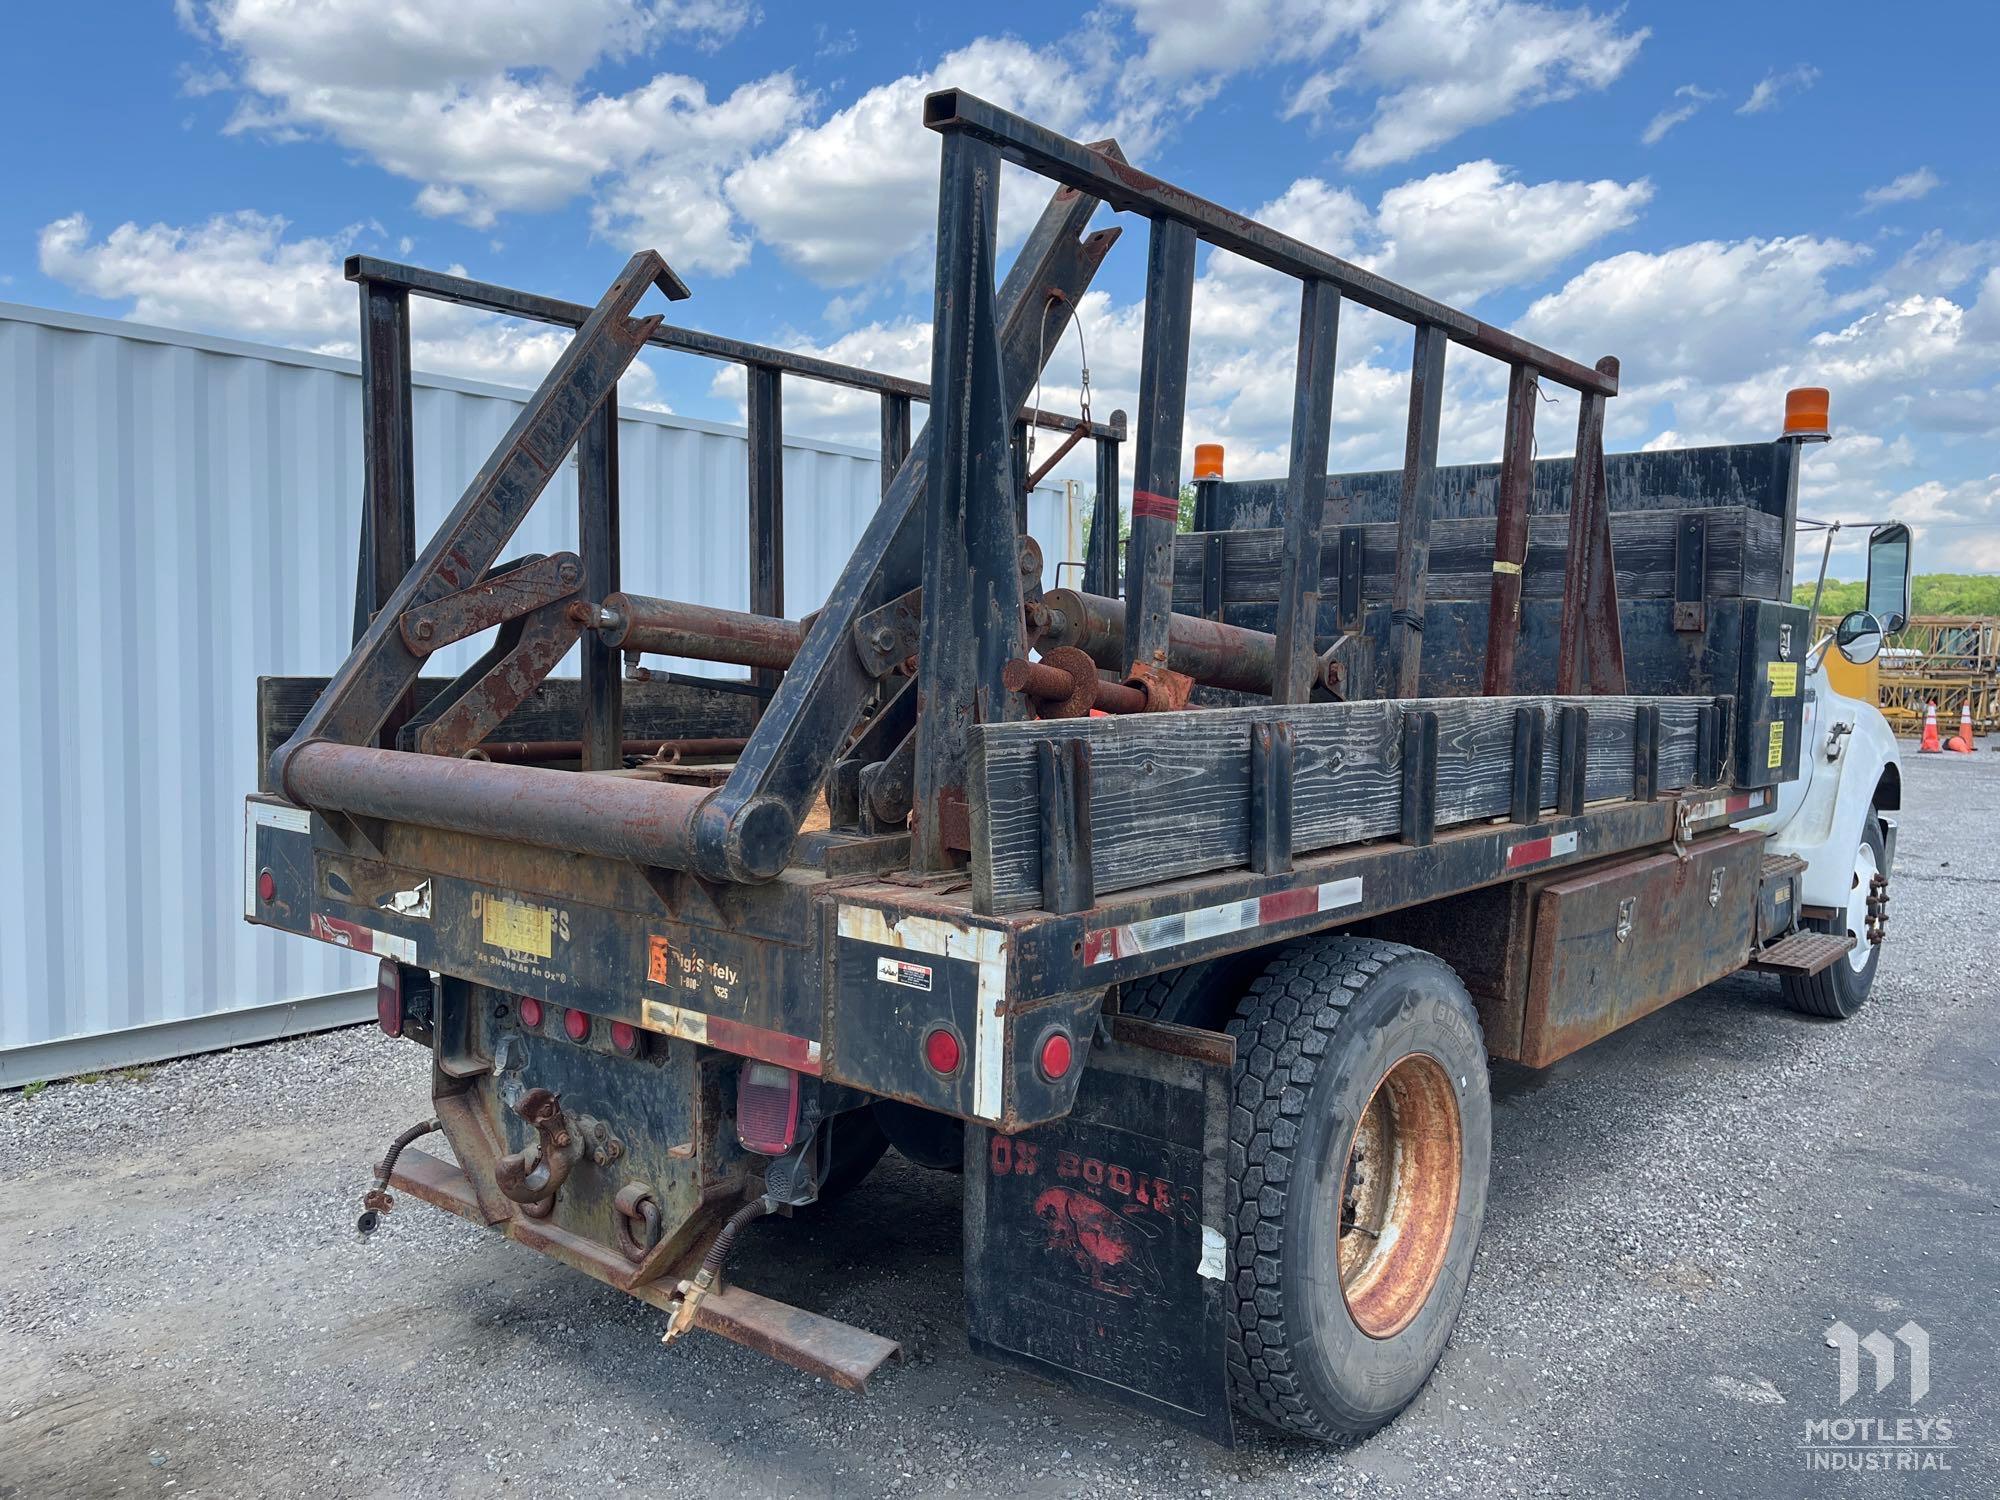 2007 Ford 750 Flatbed Truck